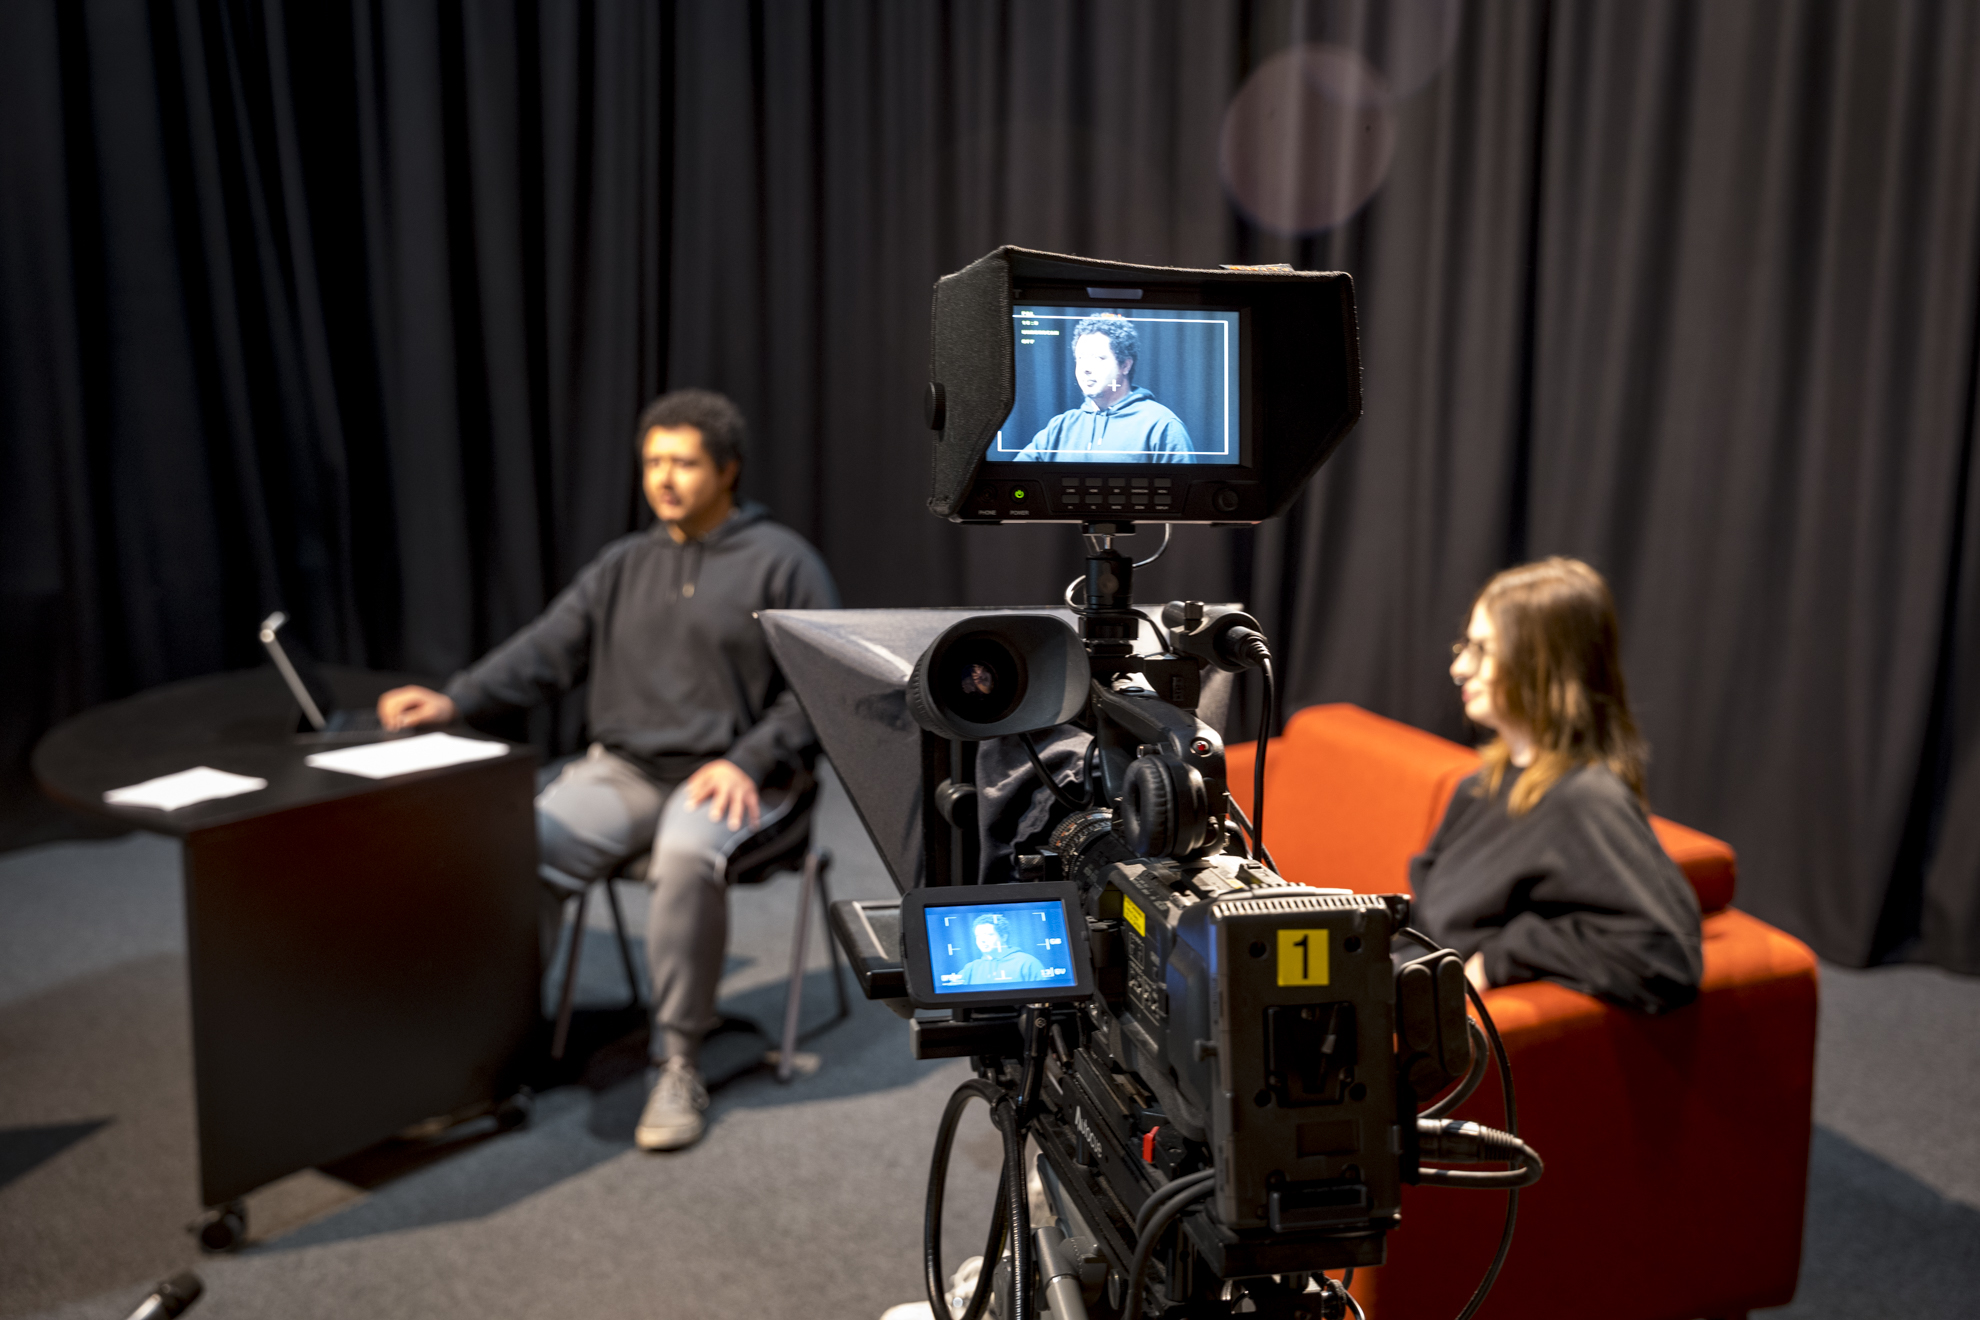 Level 2 Diploma in Creative Media Production & Technology